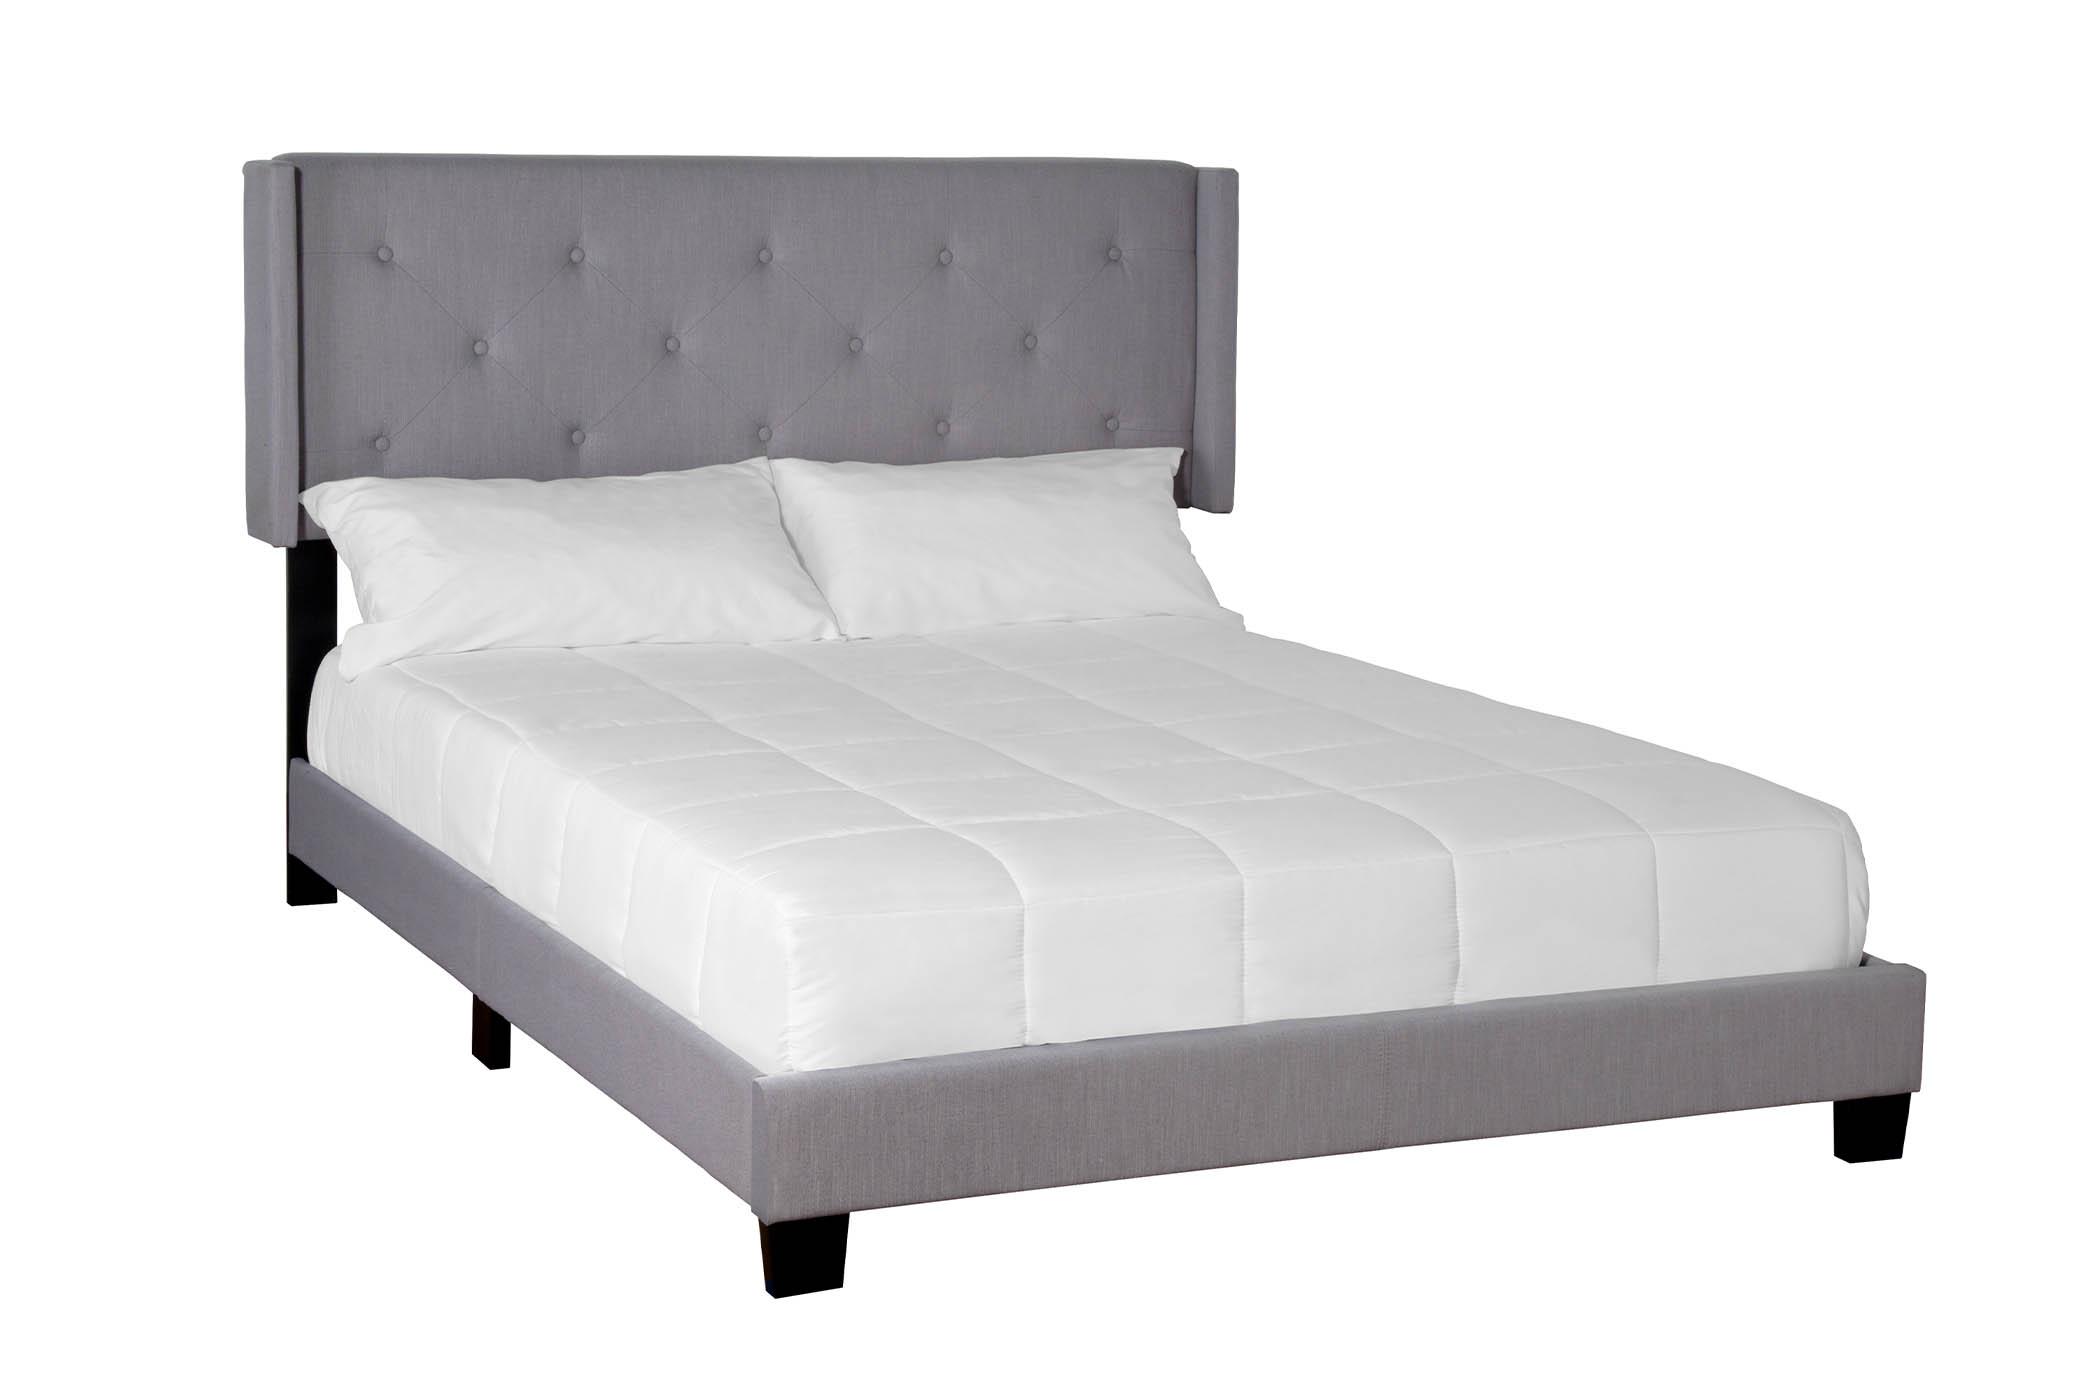 Modern, Transitional Panel Bed LYLA 1606DS-110 1606DS-110 in Gray Fabric